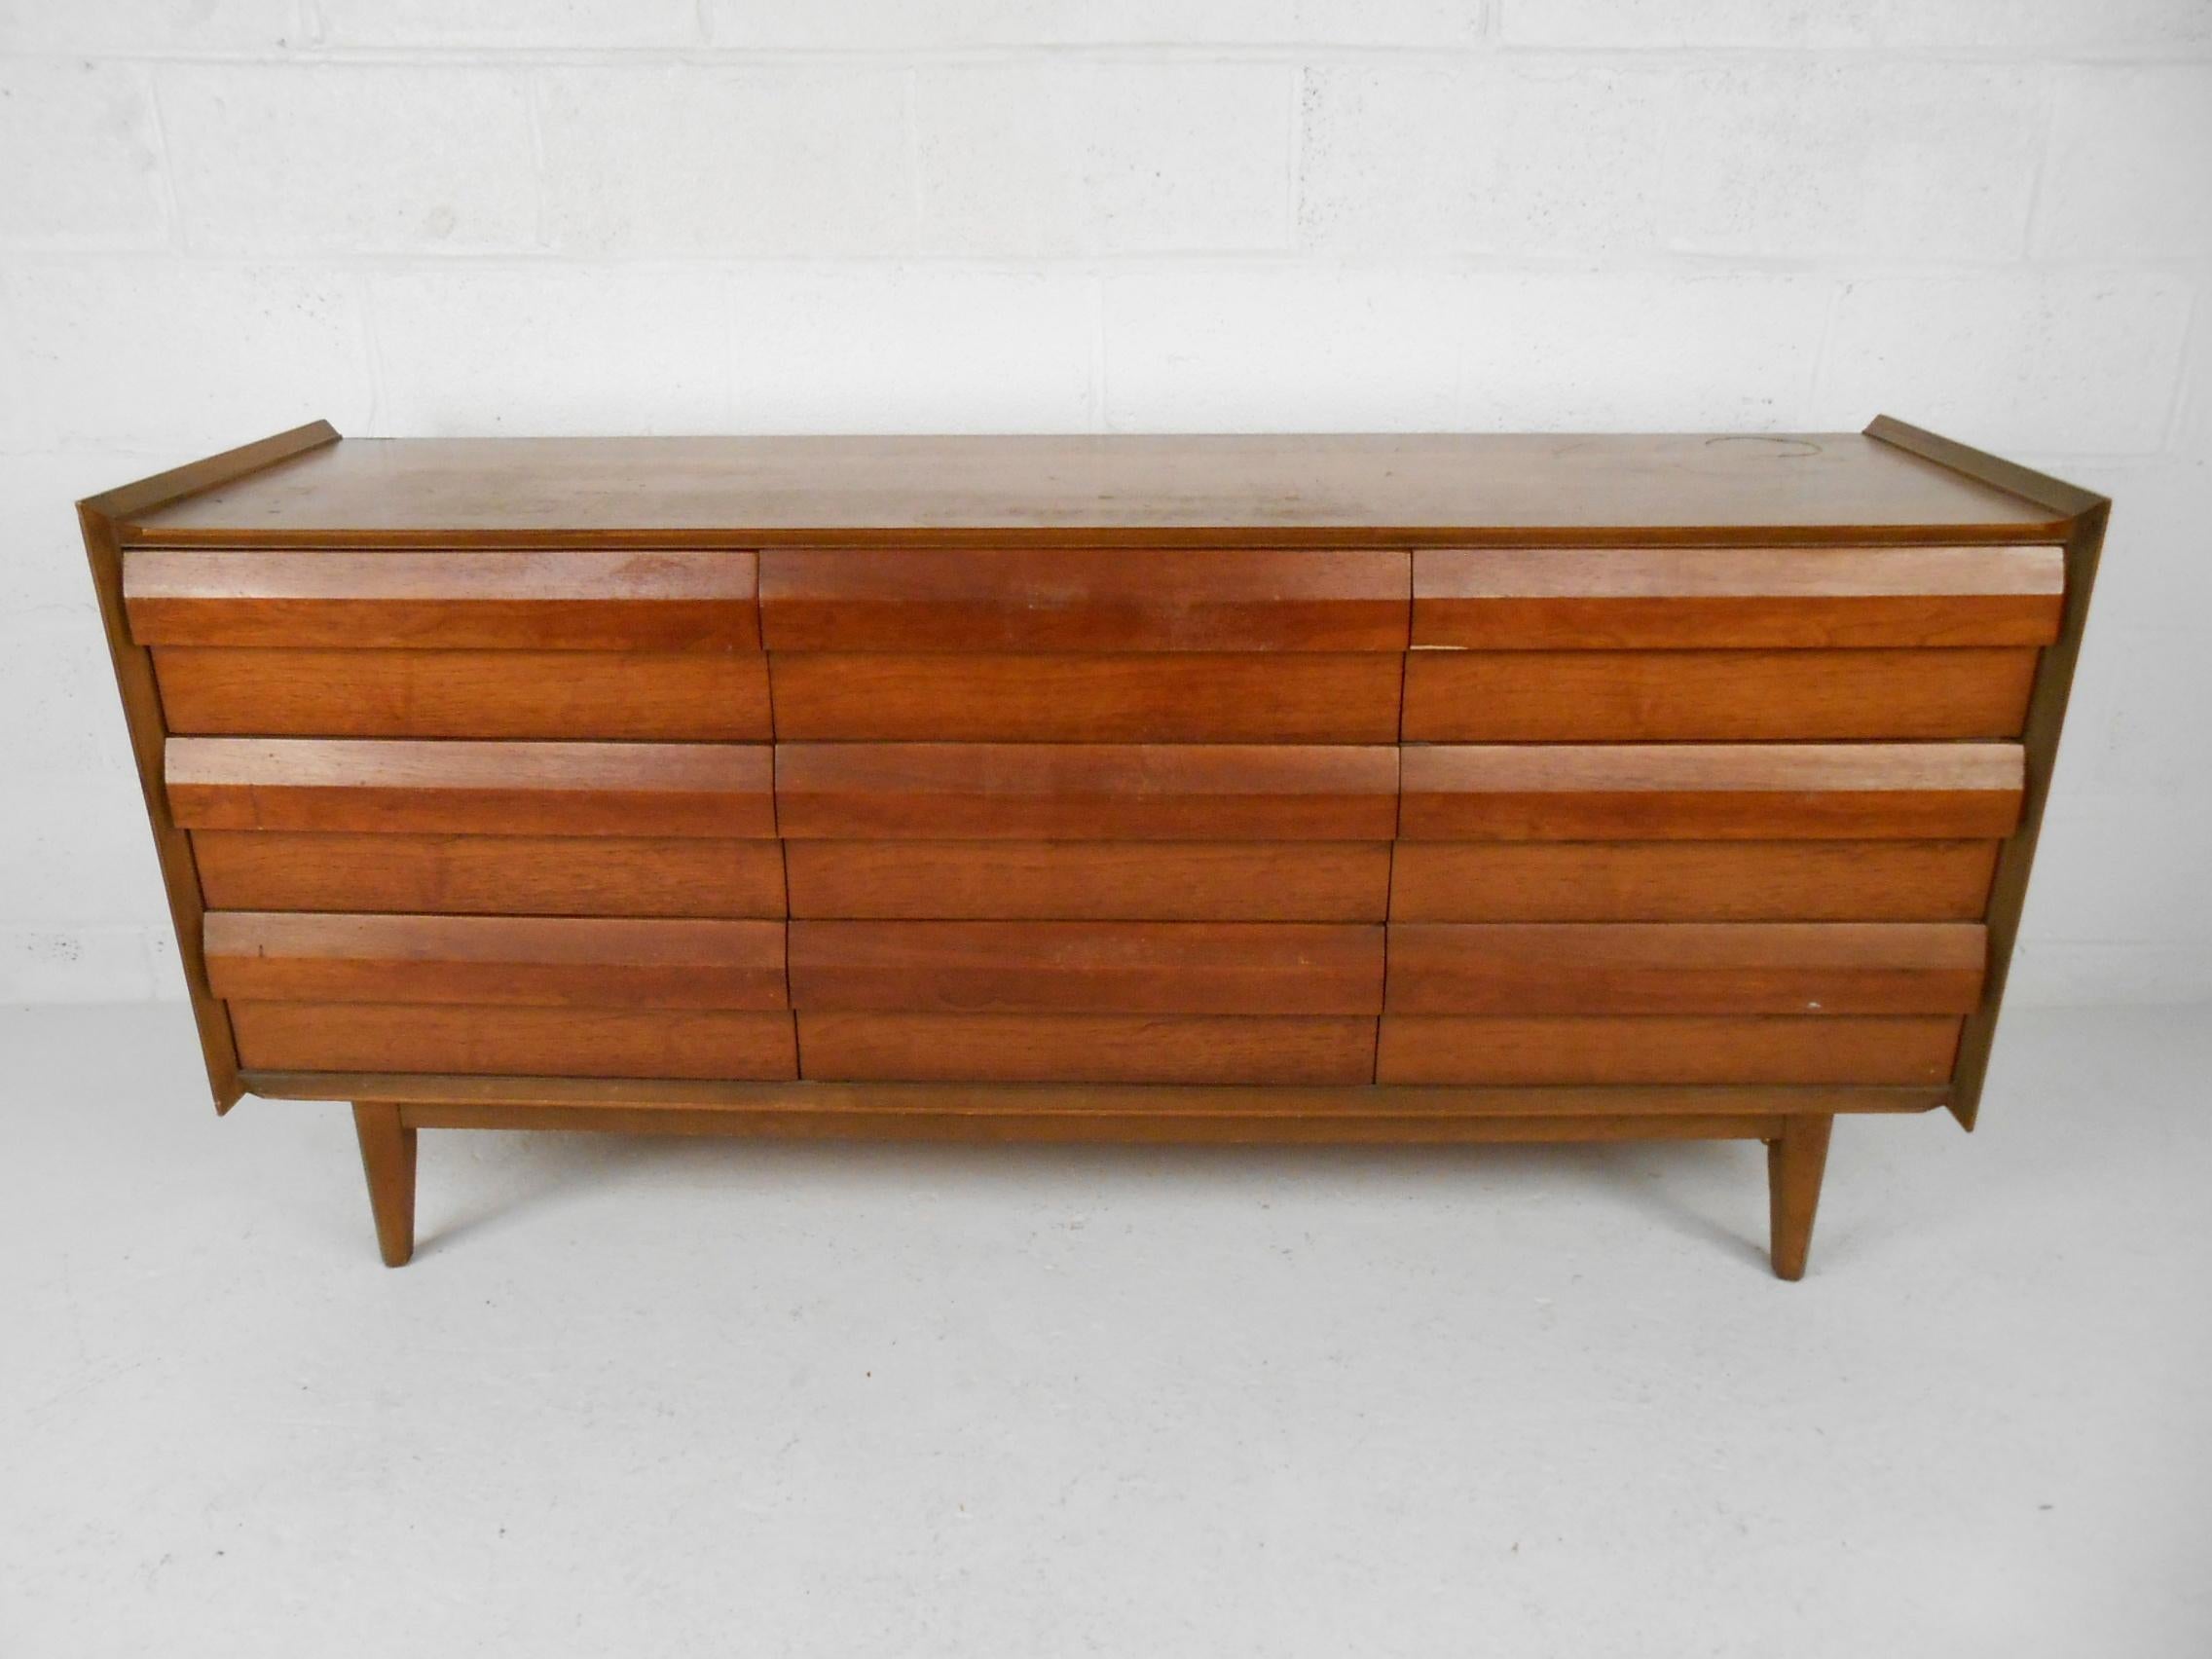 Impressive midcentury nine-drawer dresser manufactured by Lane Furniture Company in Altavista, Virginia. Nine spacious dovetail-jointed drawers with interesting sculpted drawer pulls. Raised edges on either side of the piece provide a stylish accent